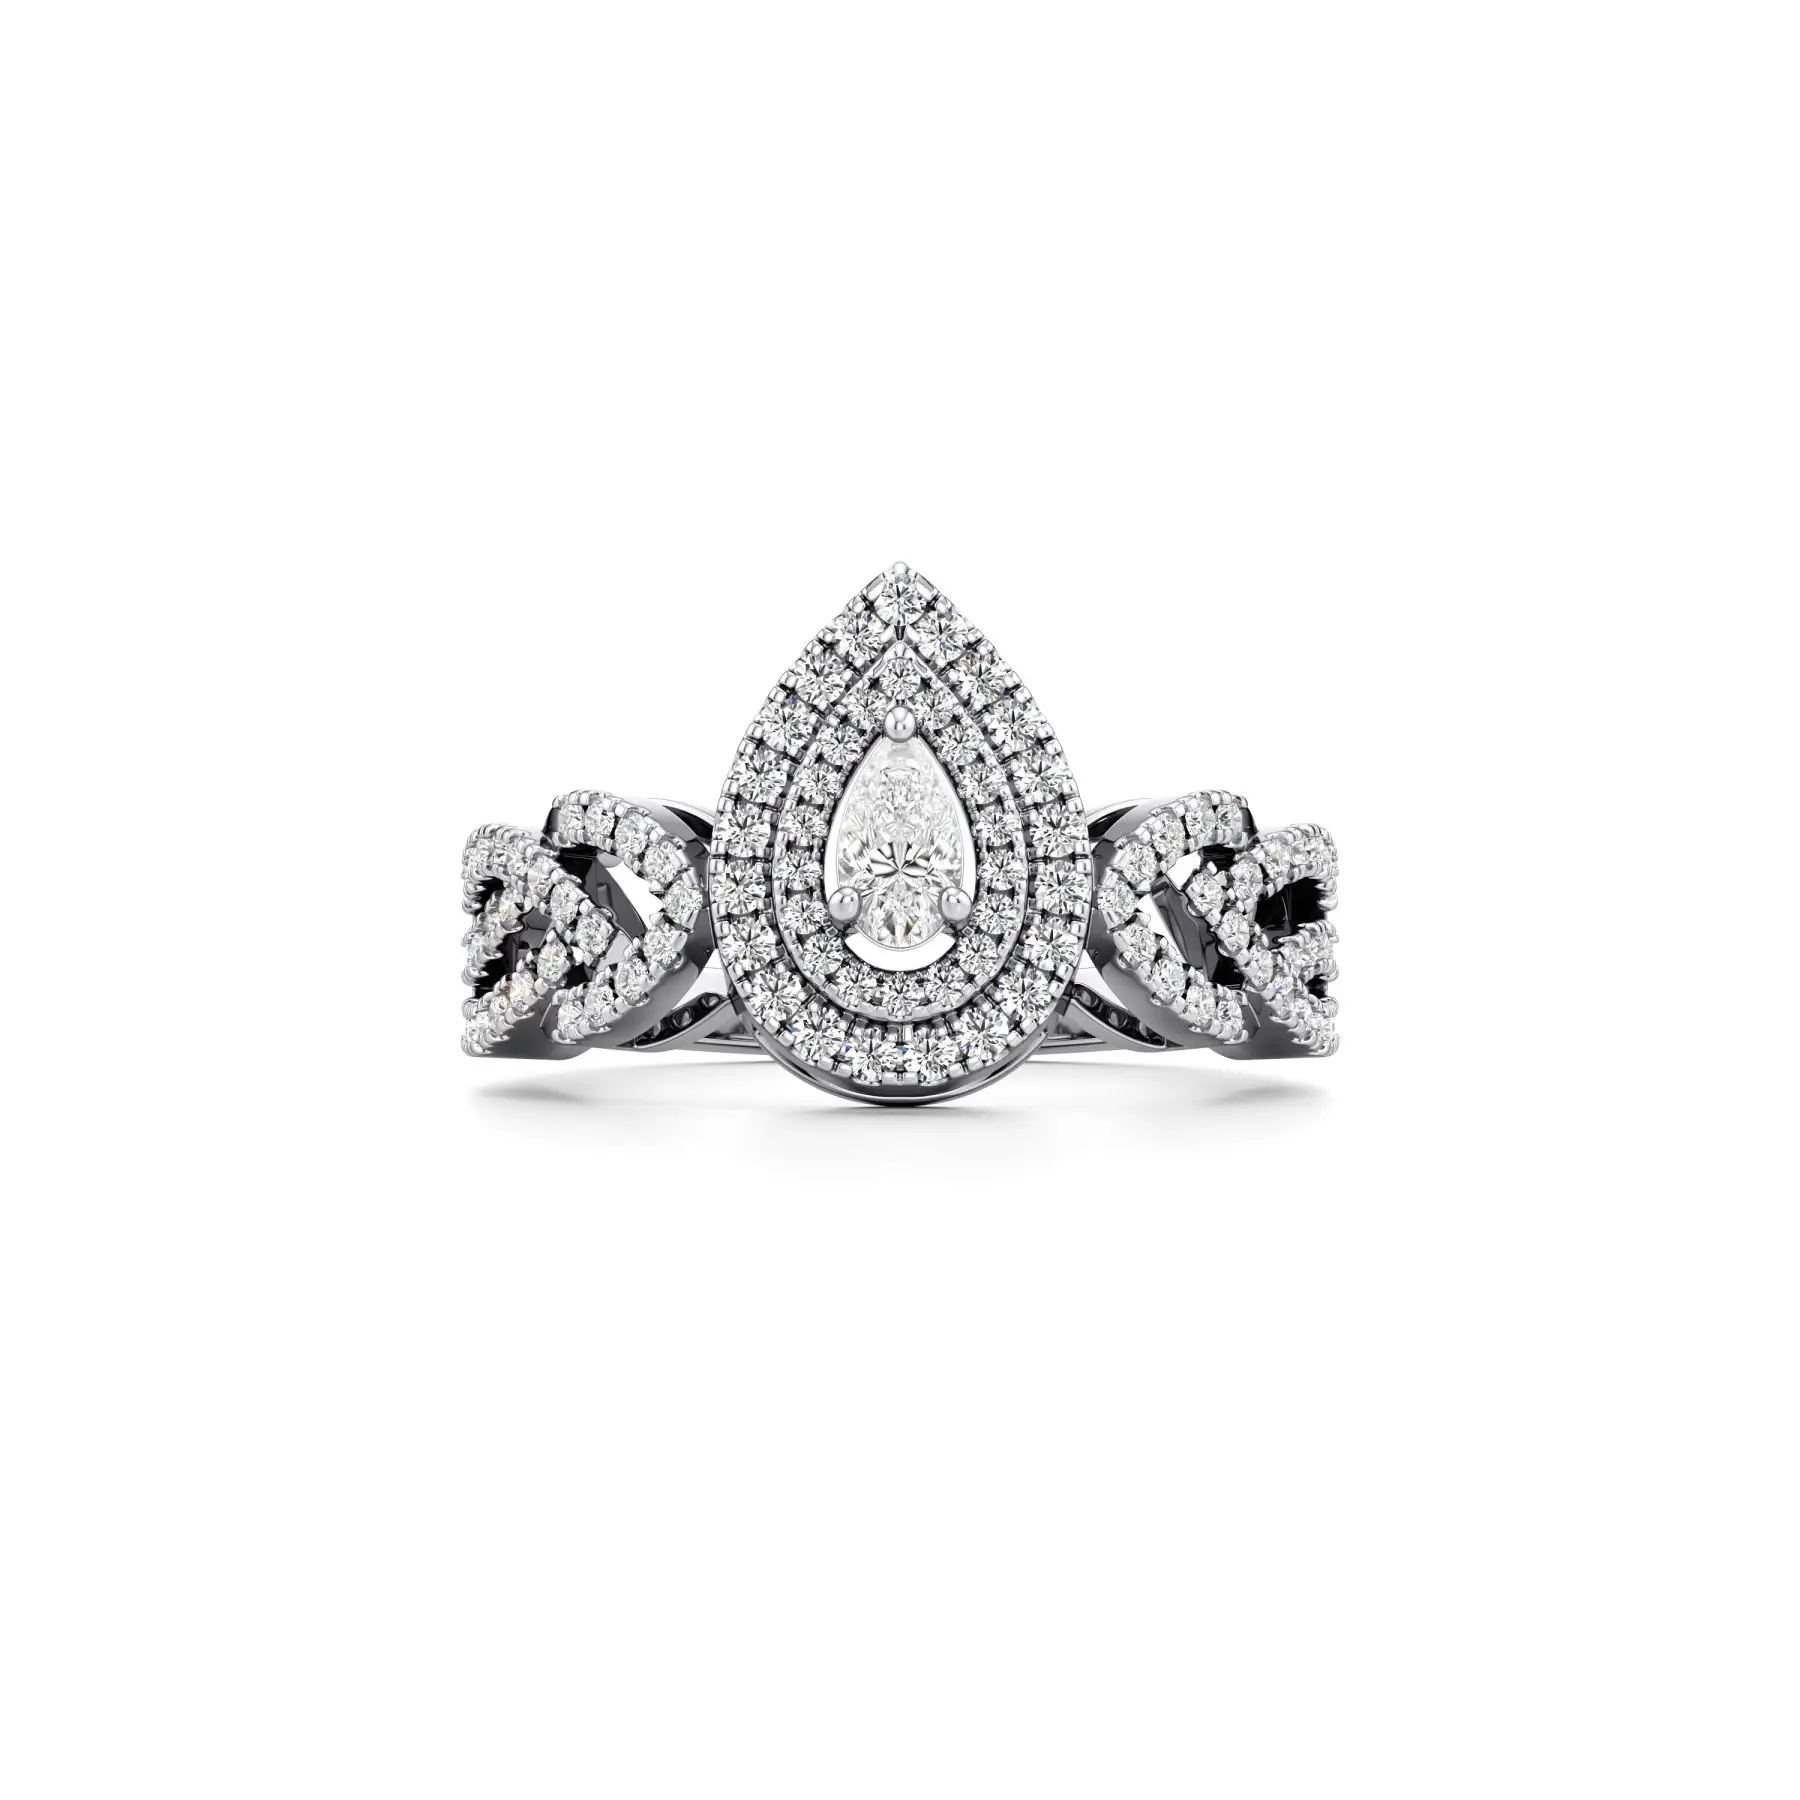 Blooming Sparkle Diamond Ring in White 10k Gold